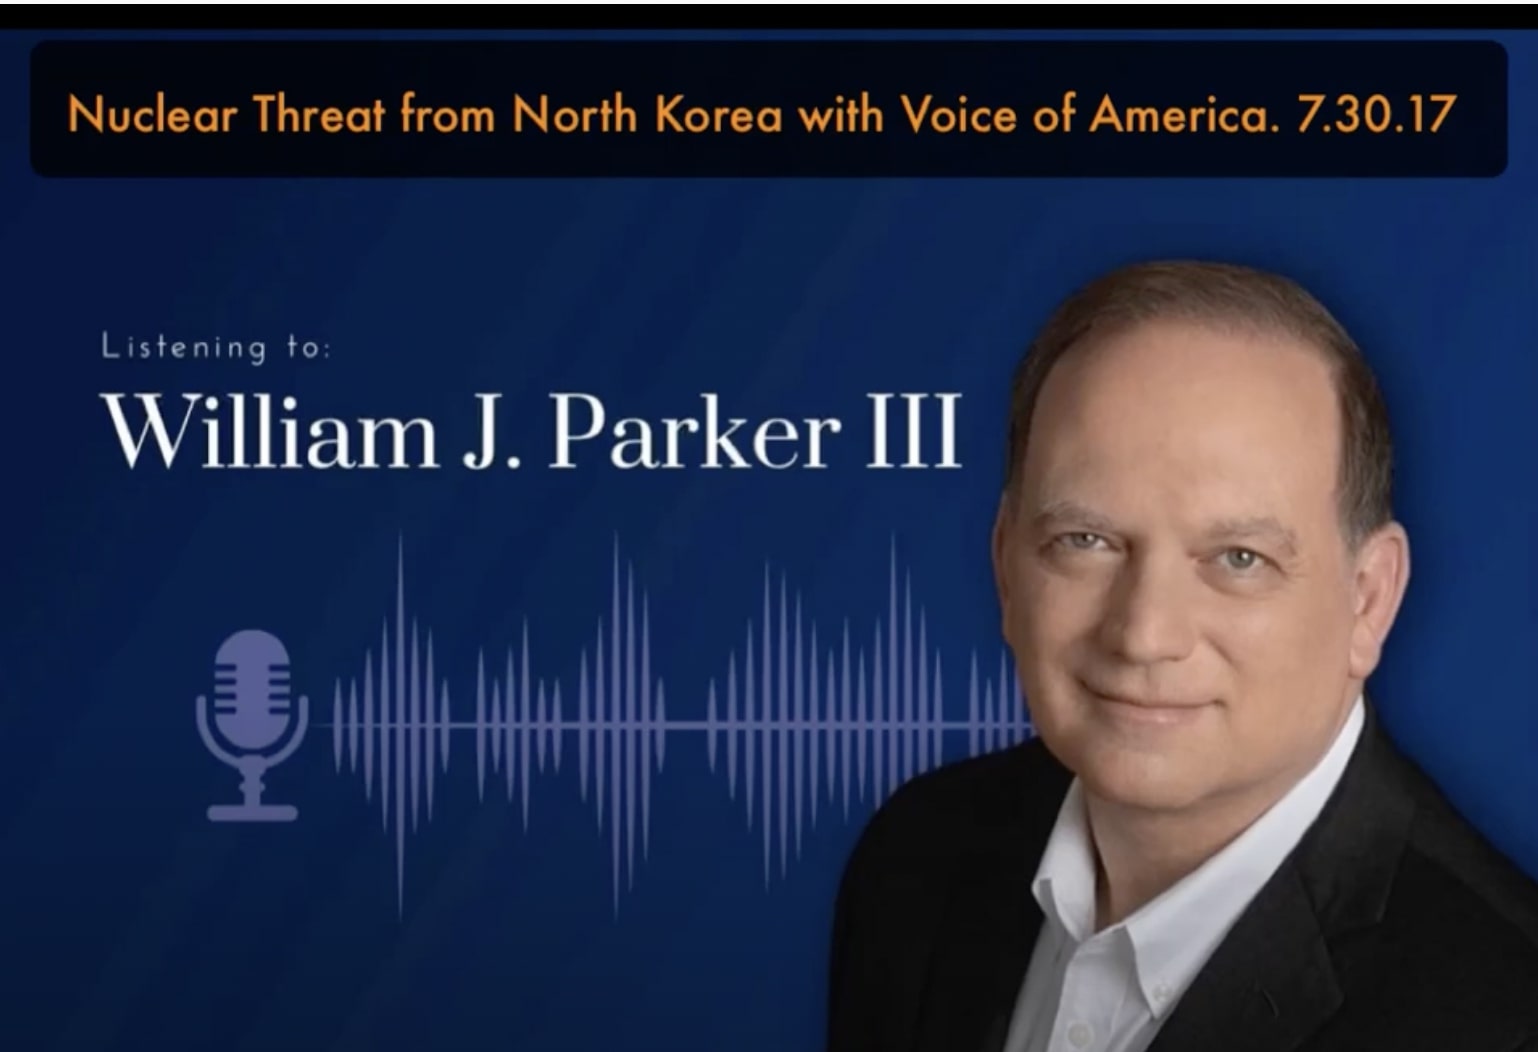 Nuclear Threat from North Korea with Voice of America. 7.30.17.